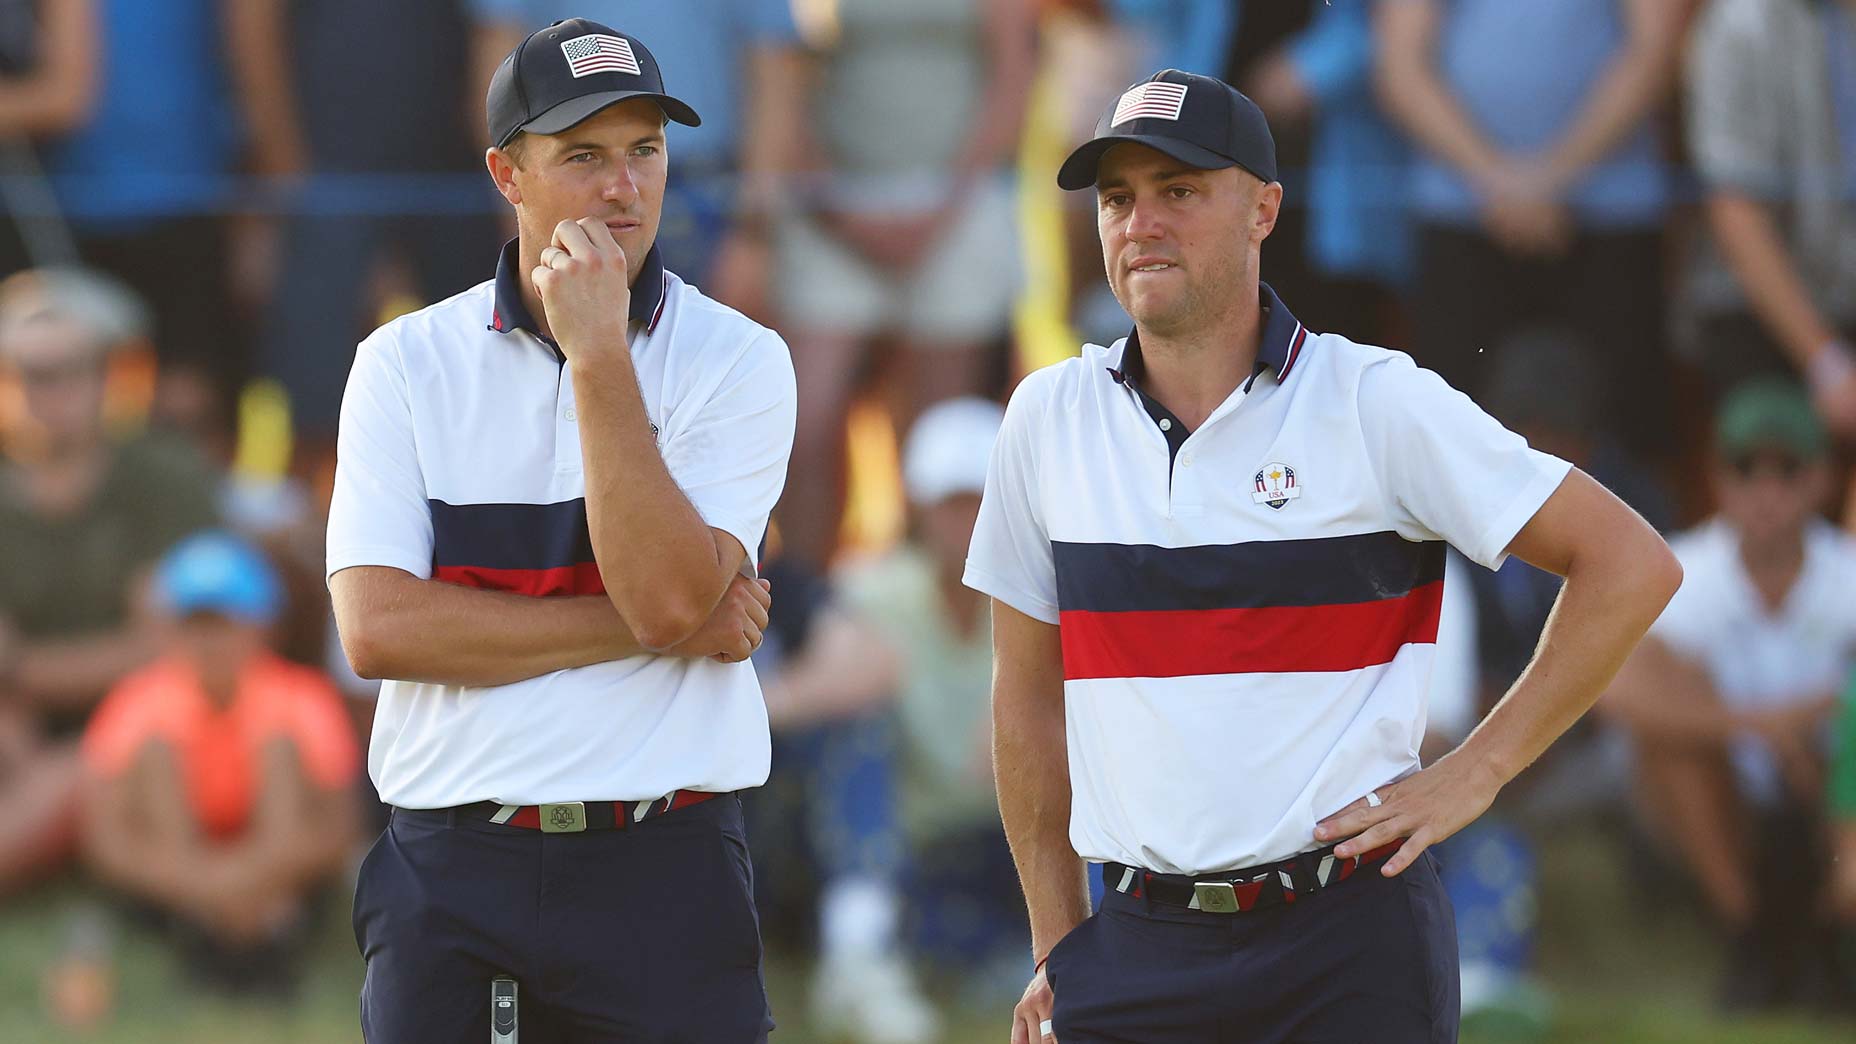 Jordan Spieth doesn't think the PGA Tour needs a deal with LIV